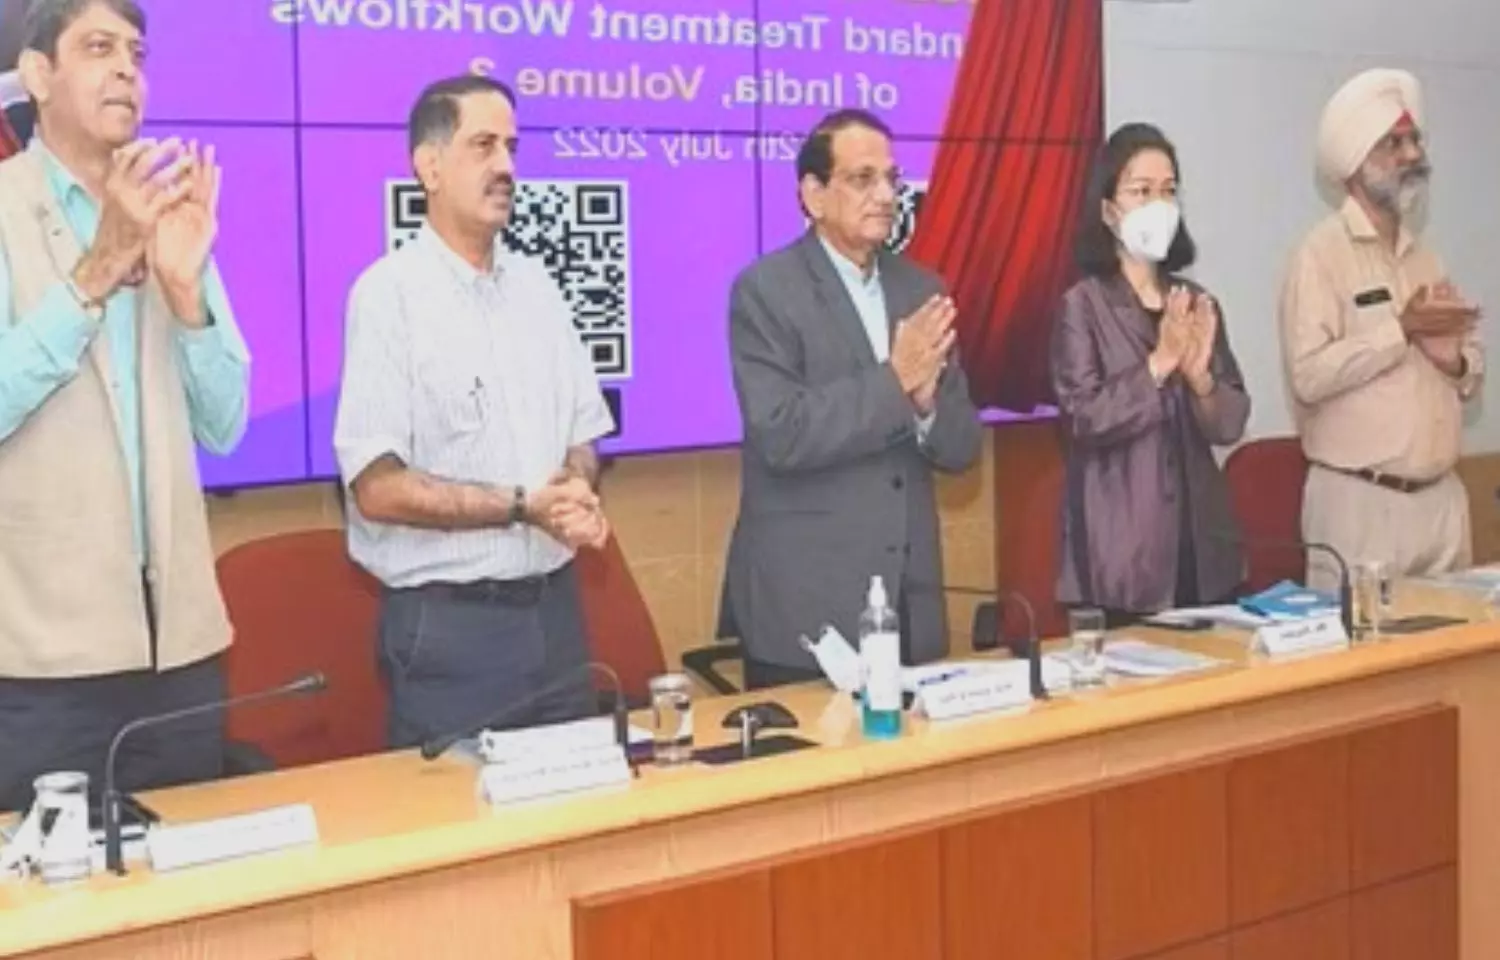 ICMR launches mobile app, book for use by physicians at all levels of public health care